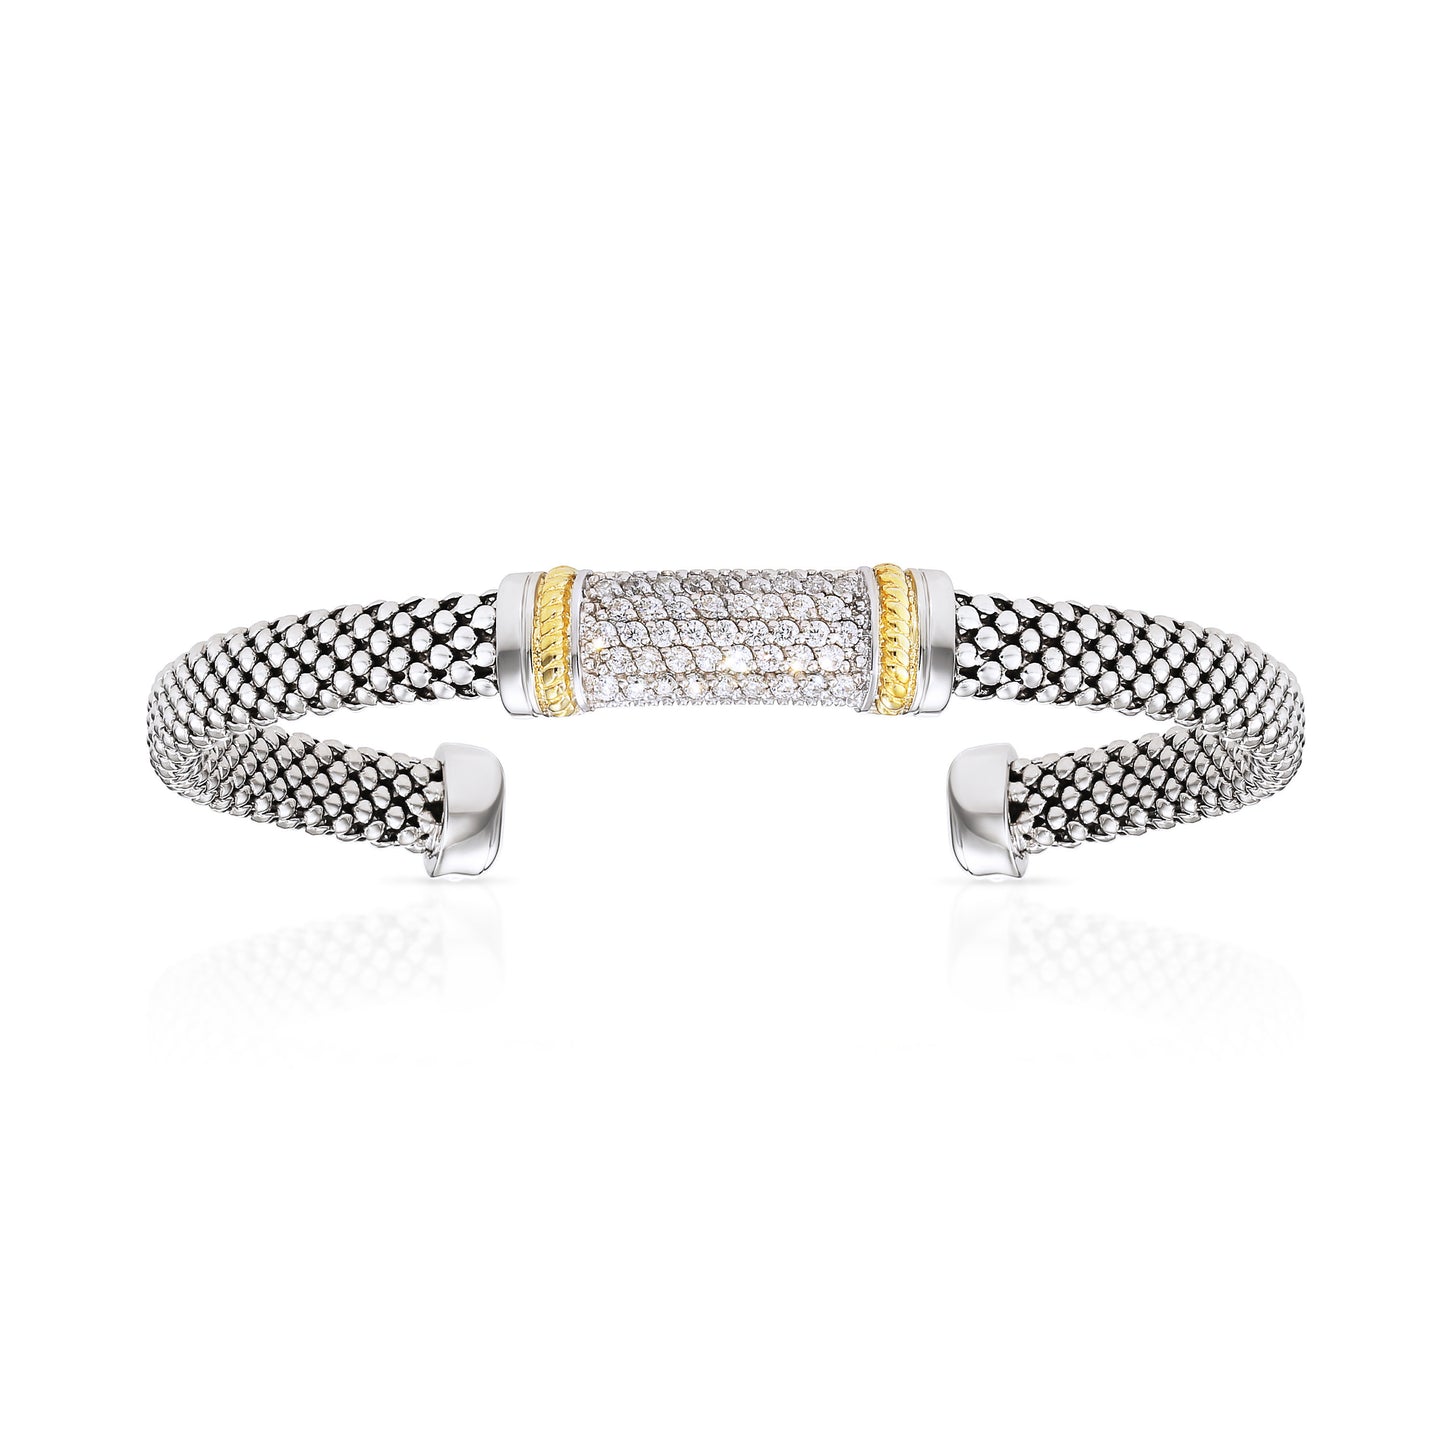 Italian Cuff Bracelet in Sterling Silver with Gold Accents